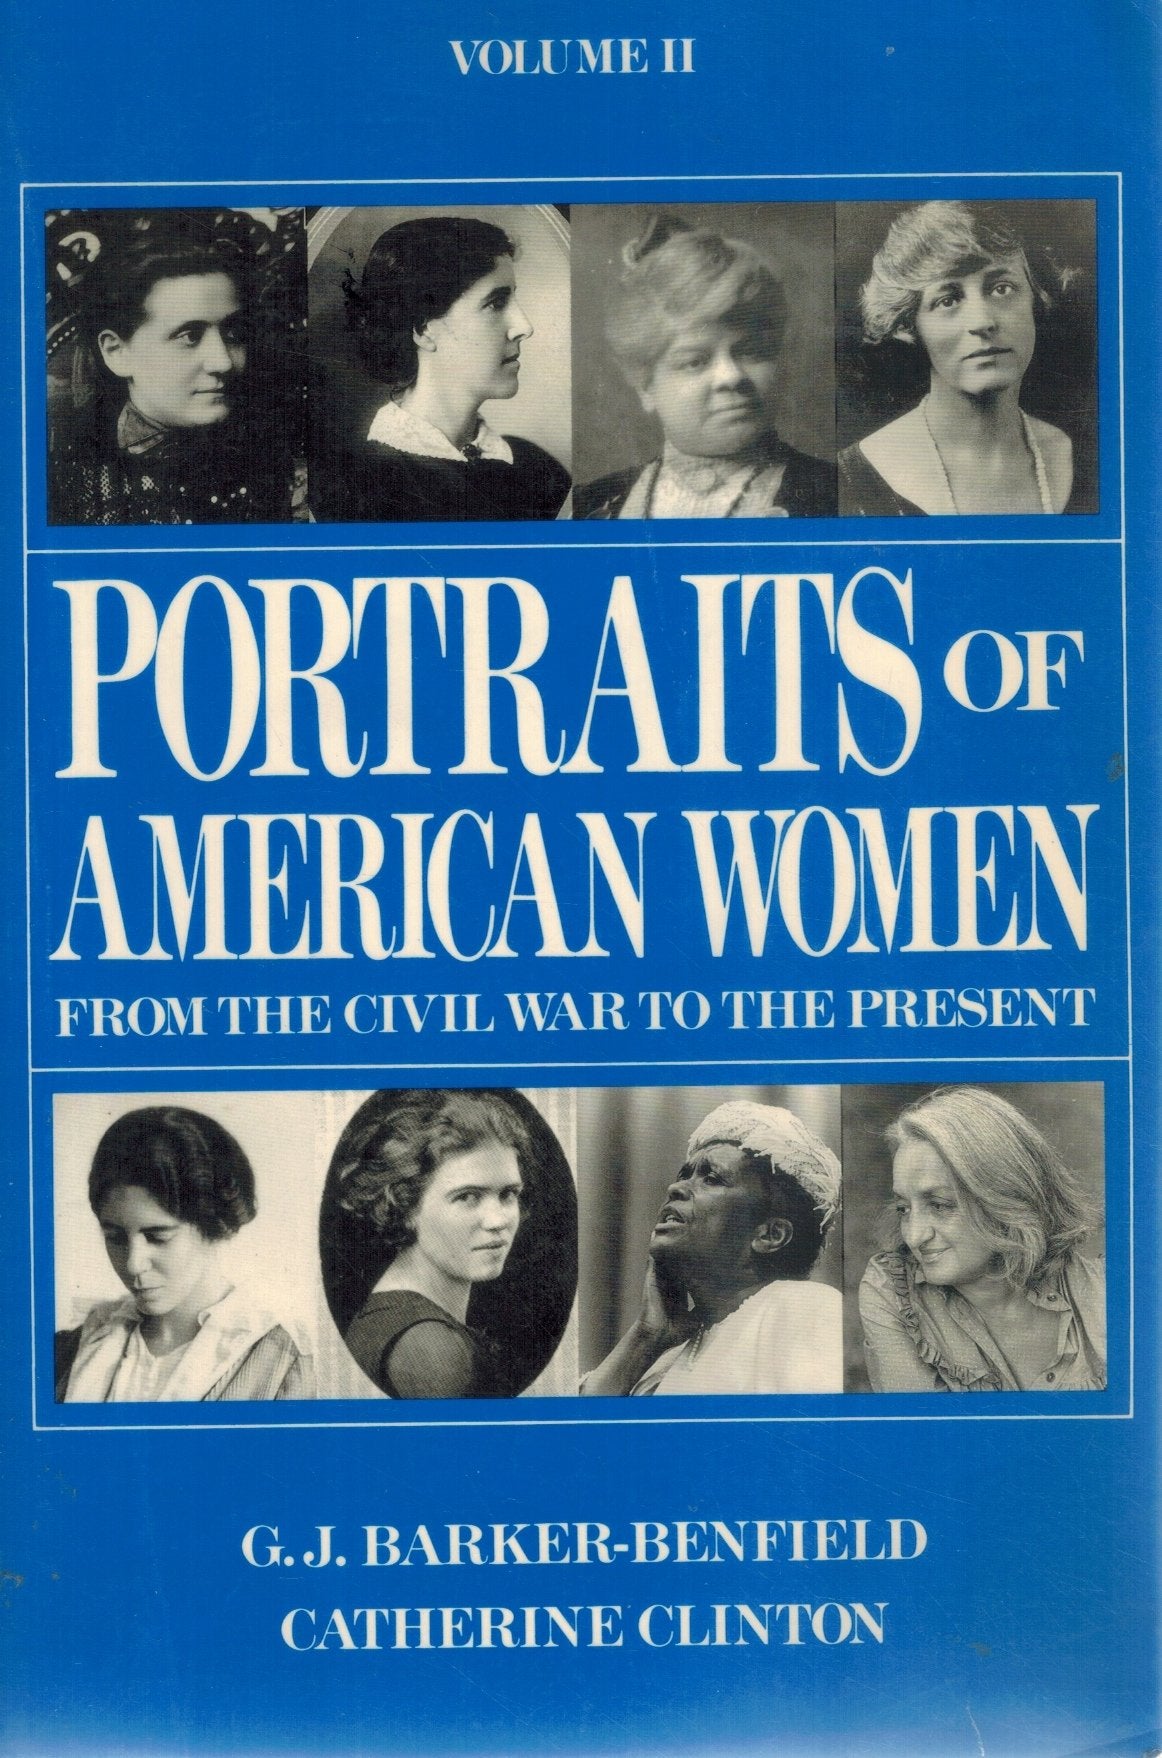 PORTRAITS OF AMERICAN WOMEN From the Civil War to the Present  by Barker-Benfield, G. J. & Catherine Clinton